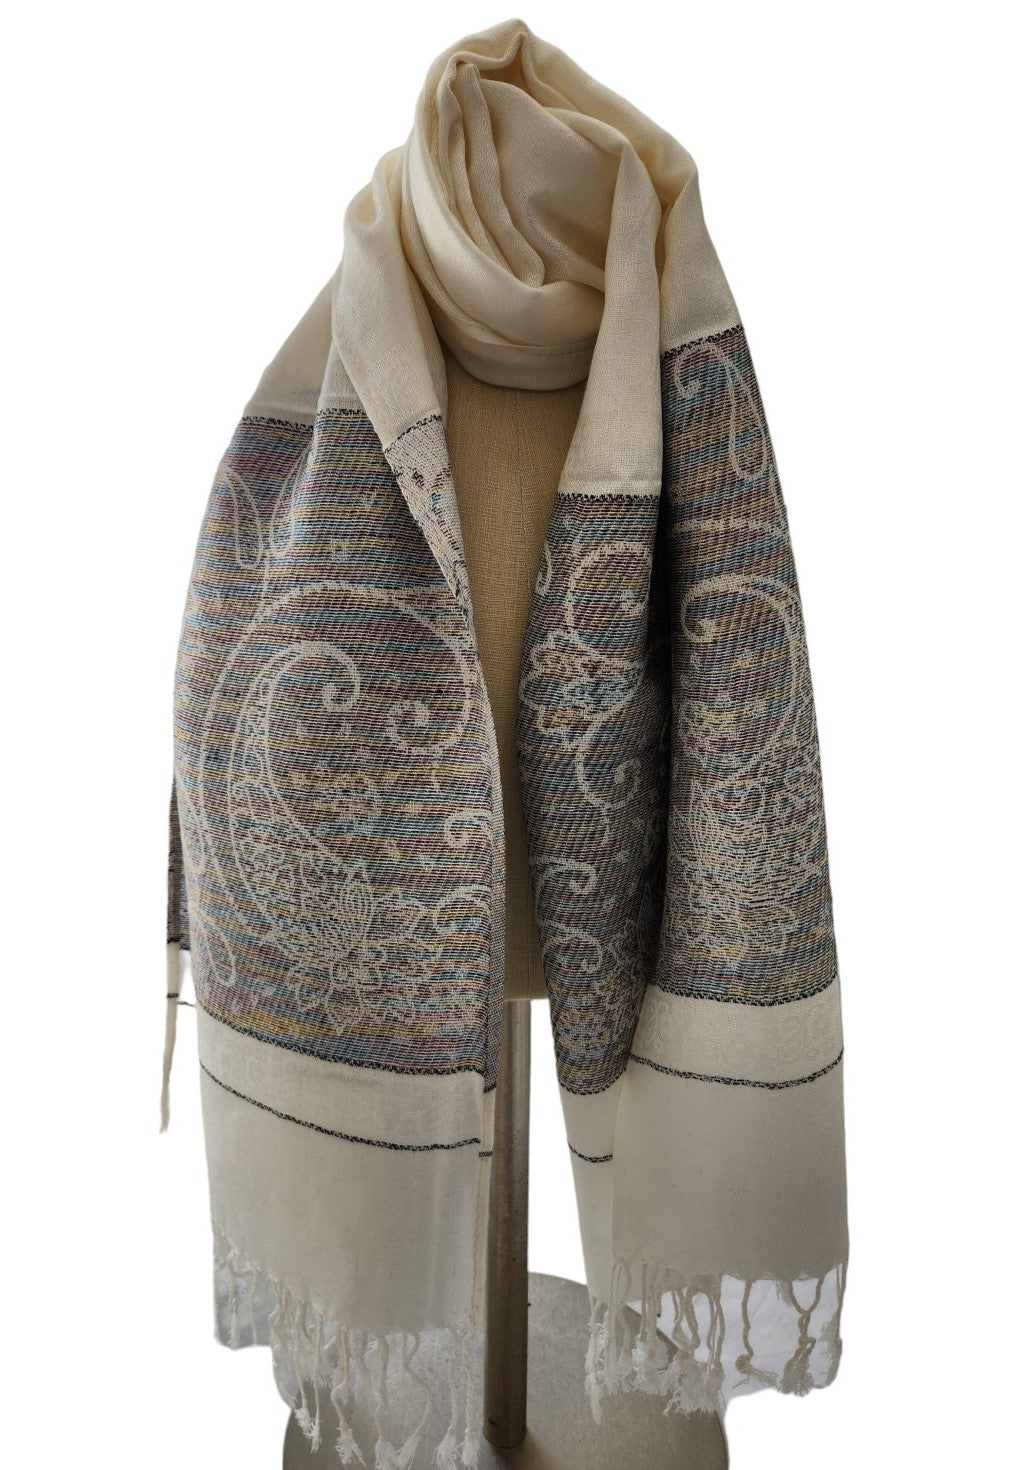 Women's Lightweight Pashmina Floral Paisley Scarves or Wrap - Perfect for Warmer Weather and Change in Seasons - 0